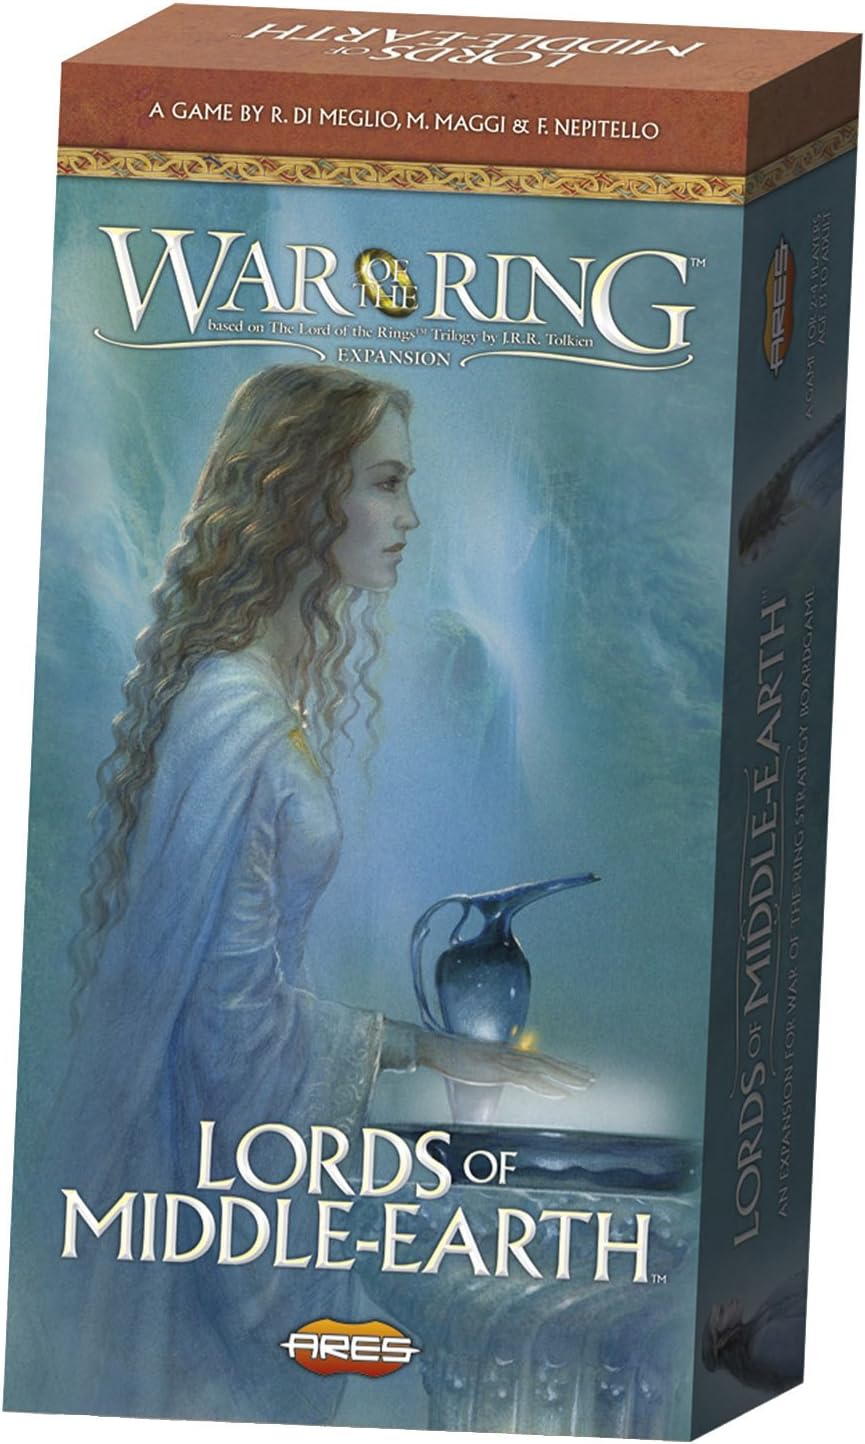 War of the Ring Expansion: Lords of Middle Earth